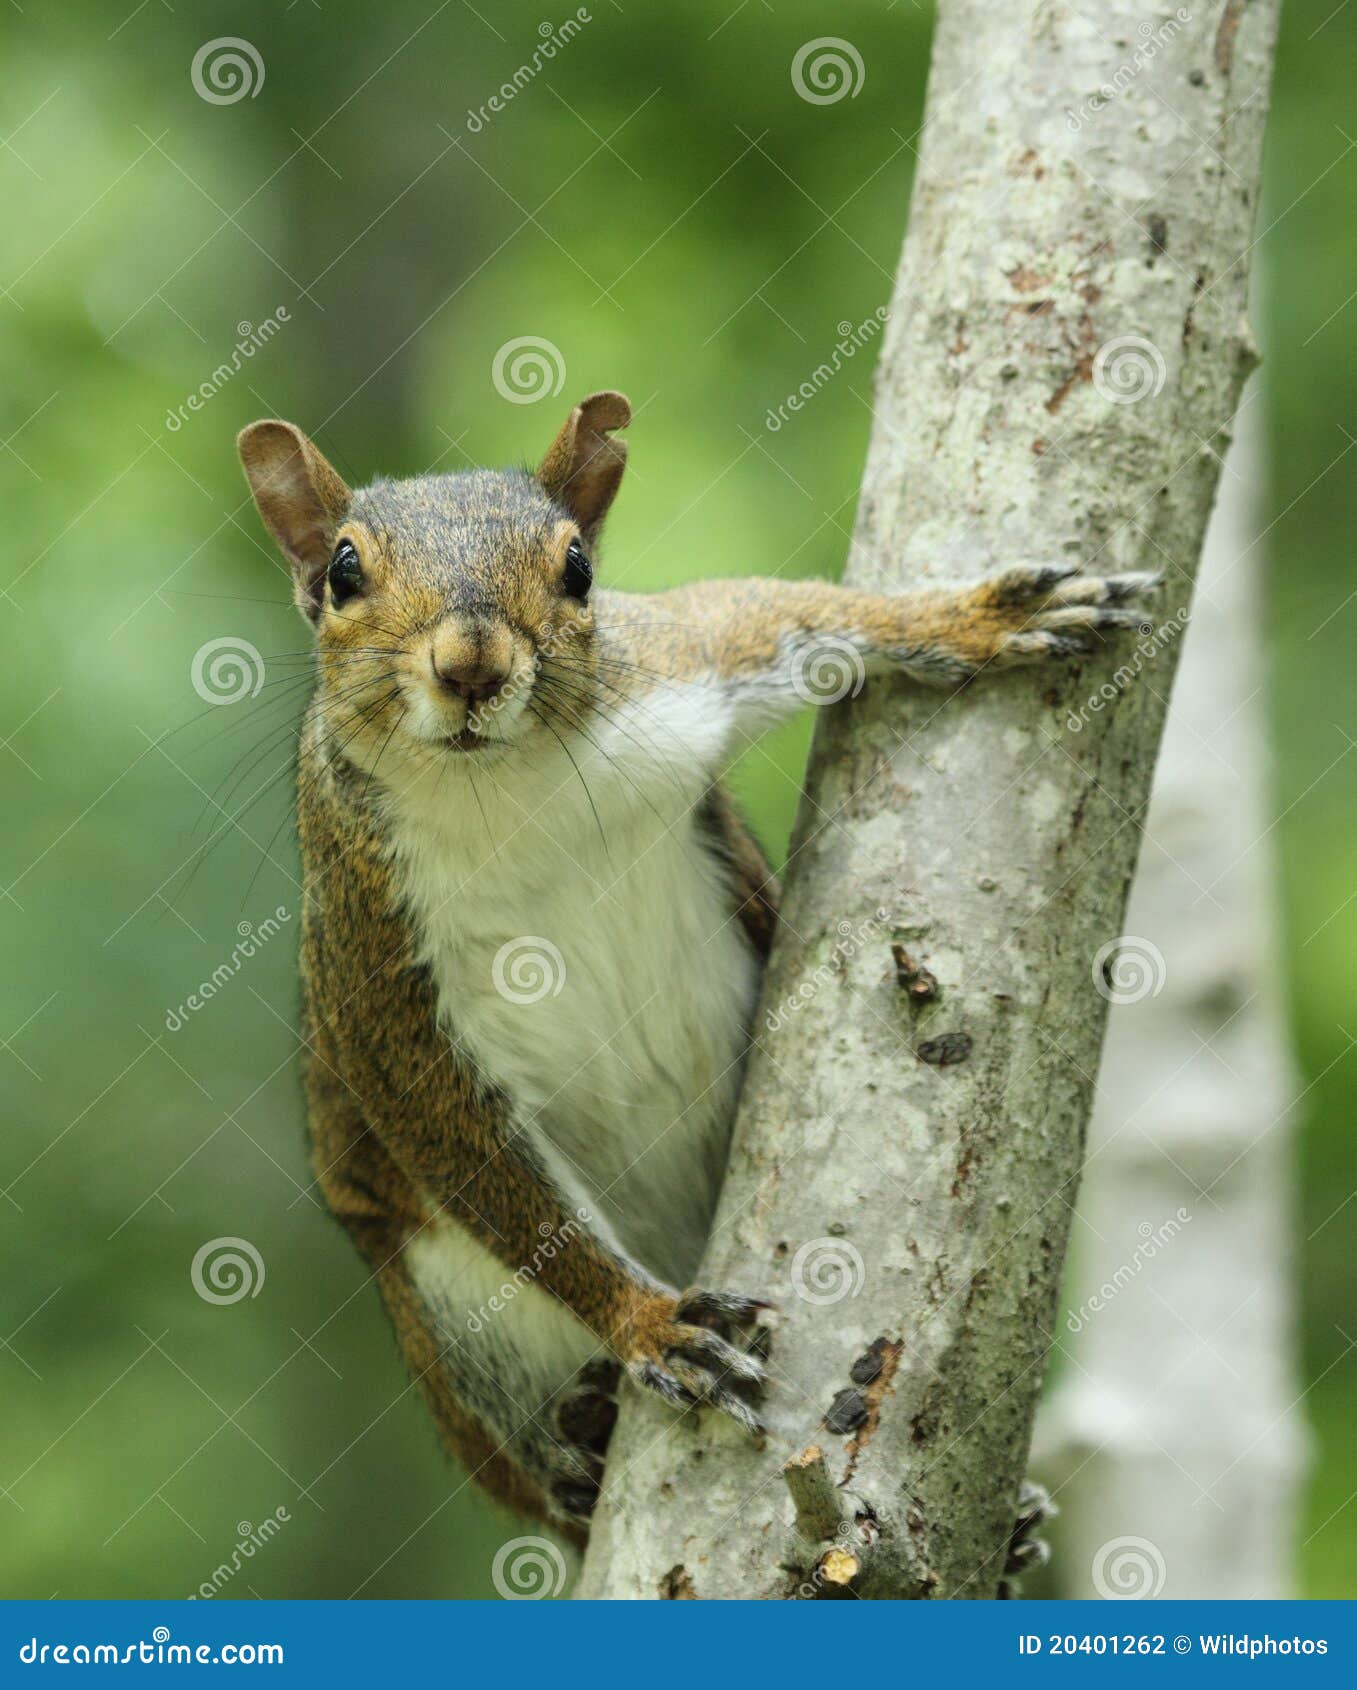 gray squirrel on tree trunk